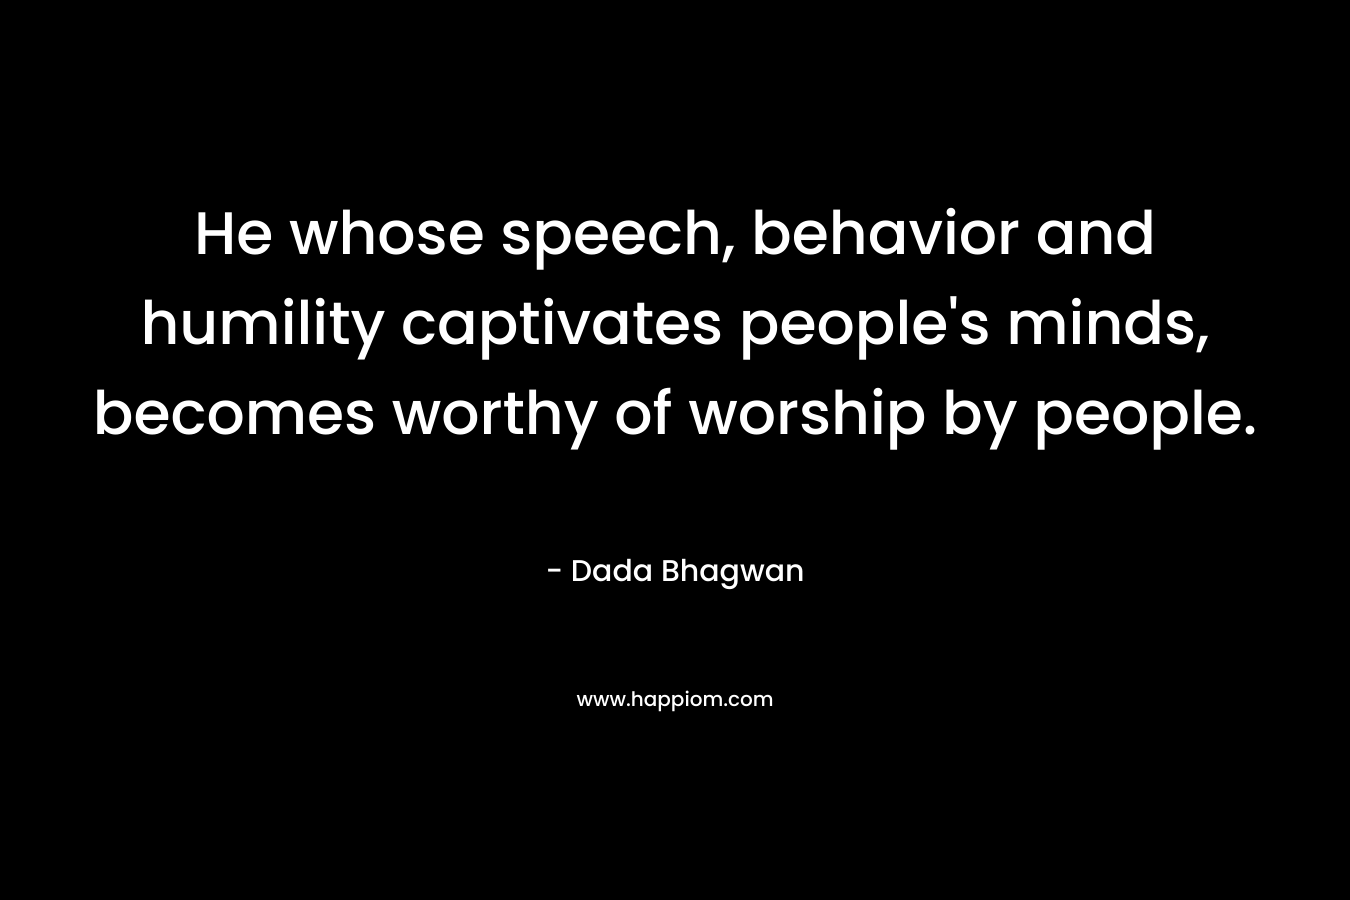 He whose speech, behavior and humility captivates people's minds, becomes worthy of worship by people.